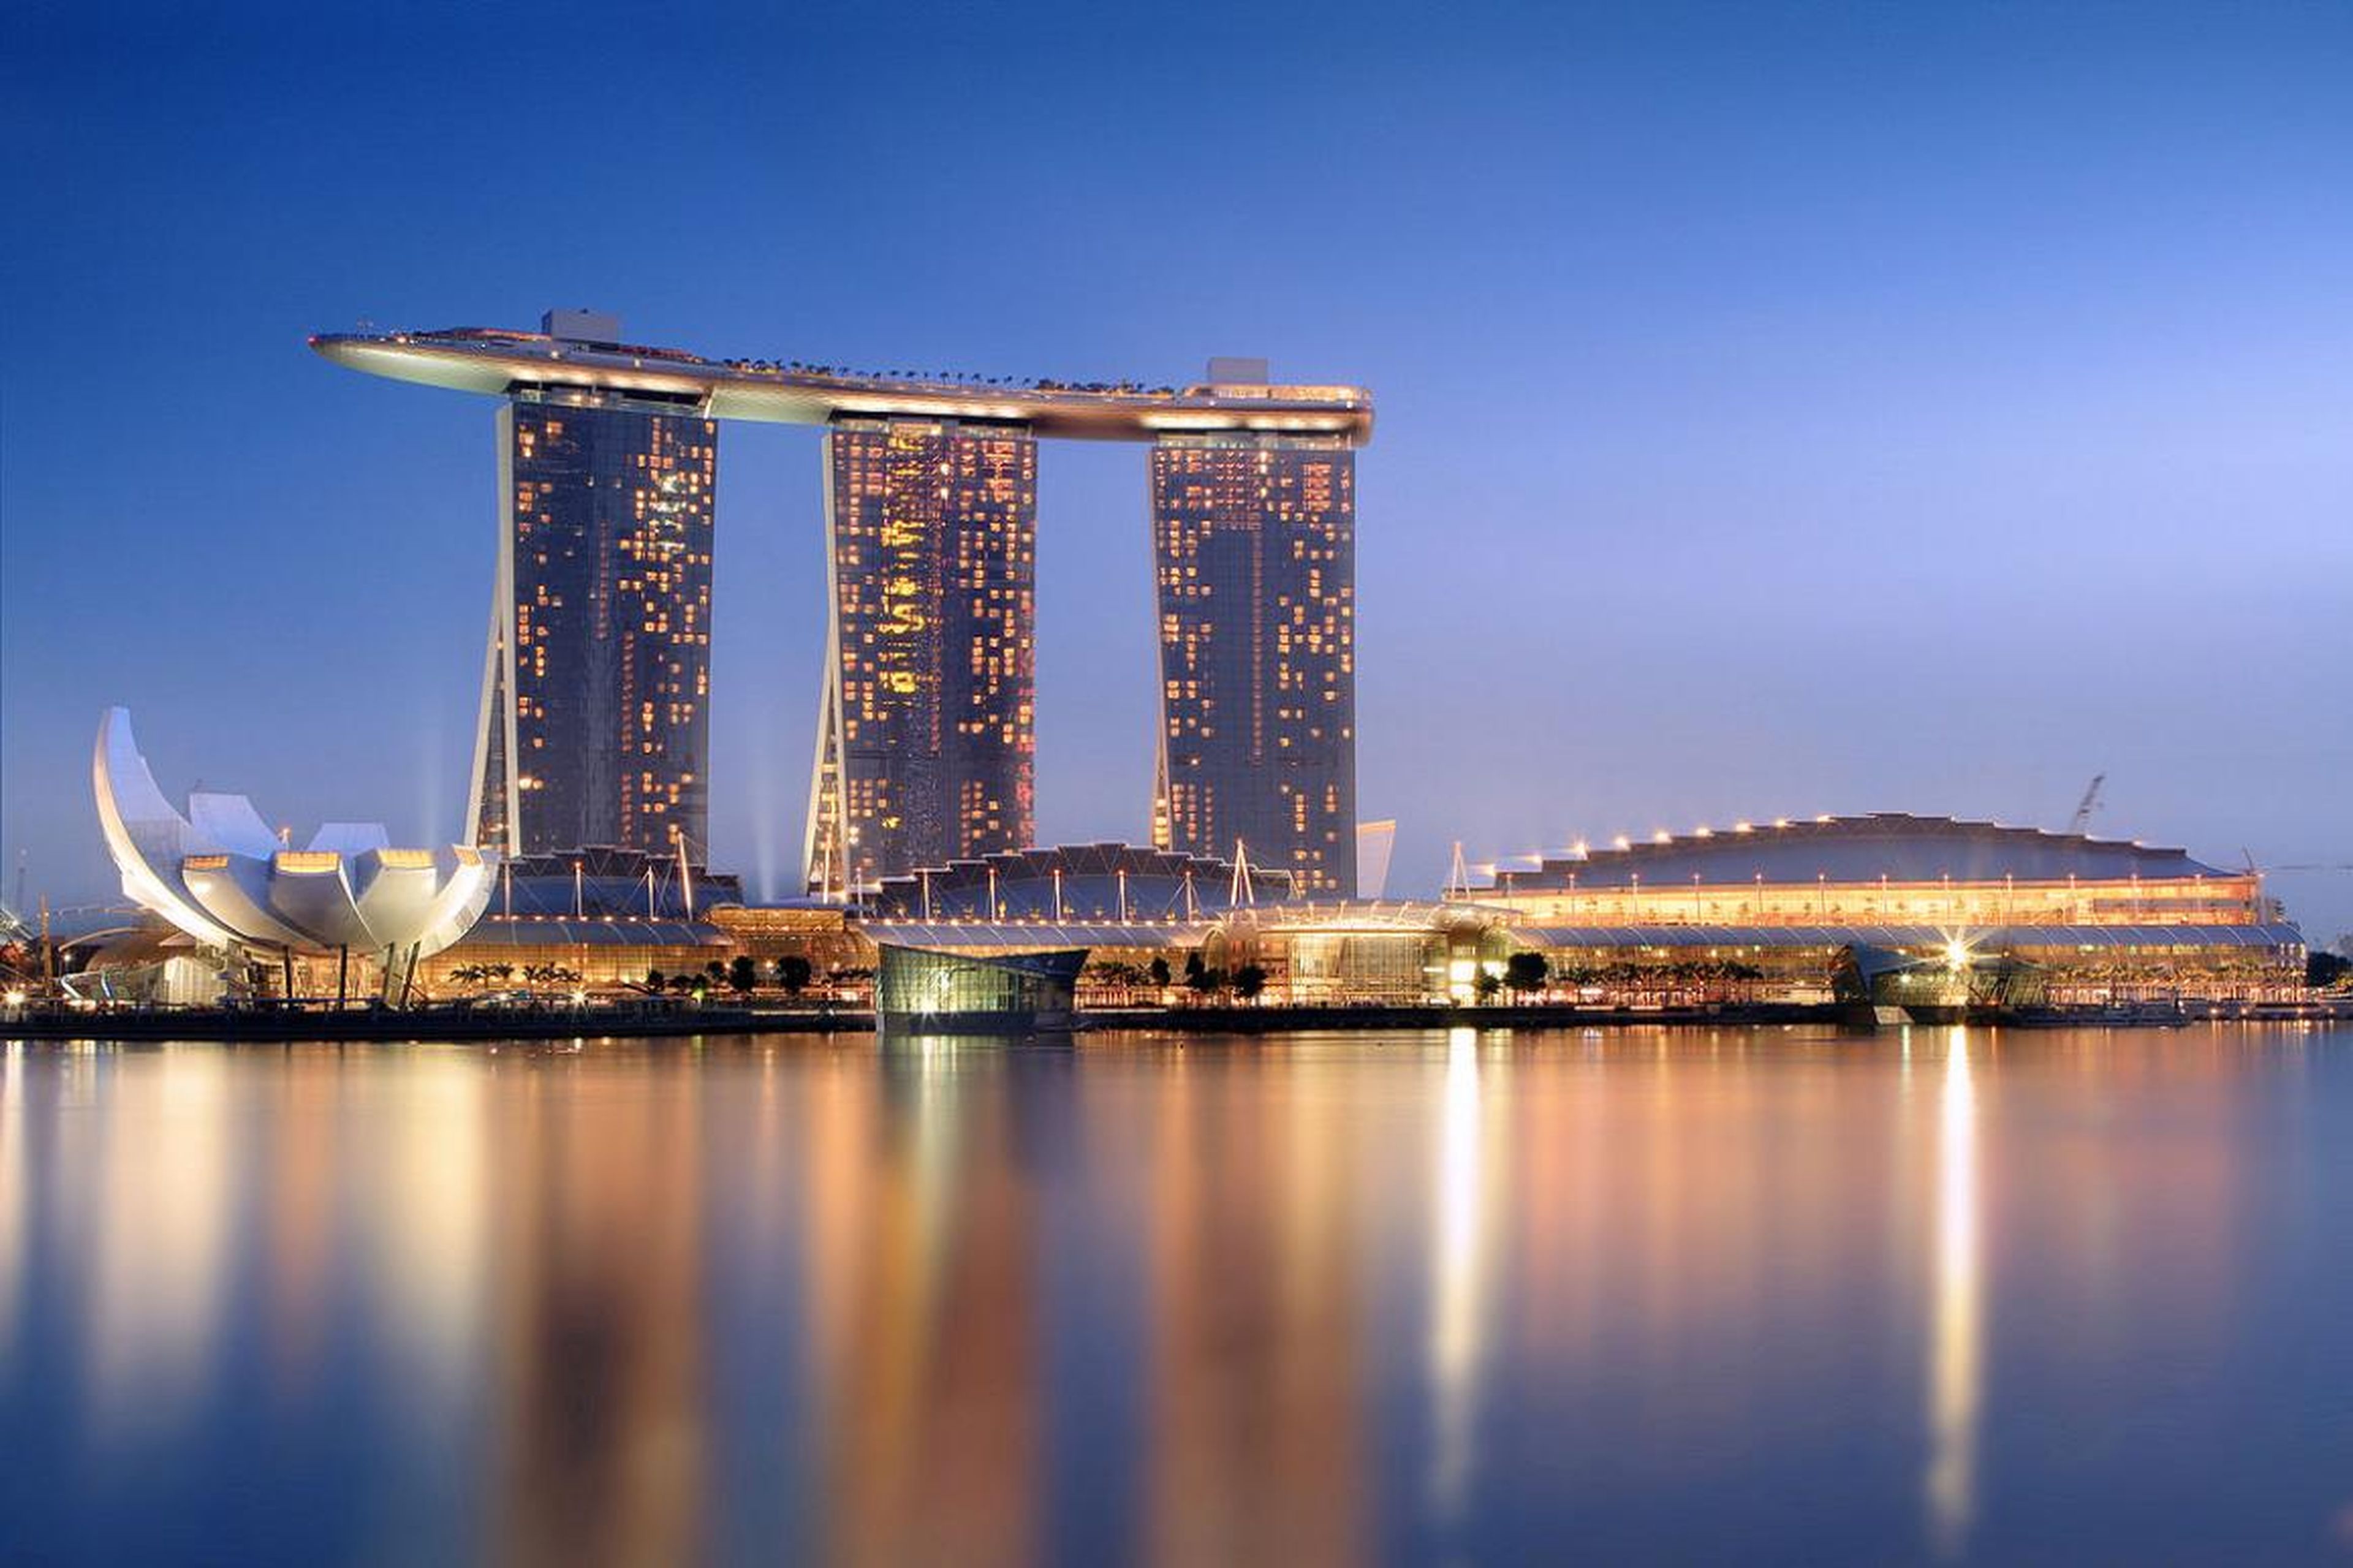 Three towers make up the Marina Bay Sands Resort, which opened in 2010 in Singapore.